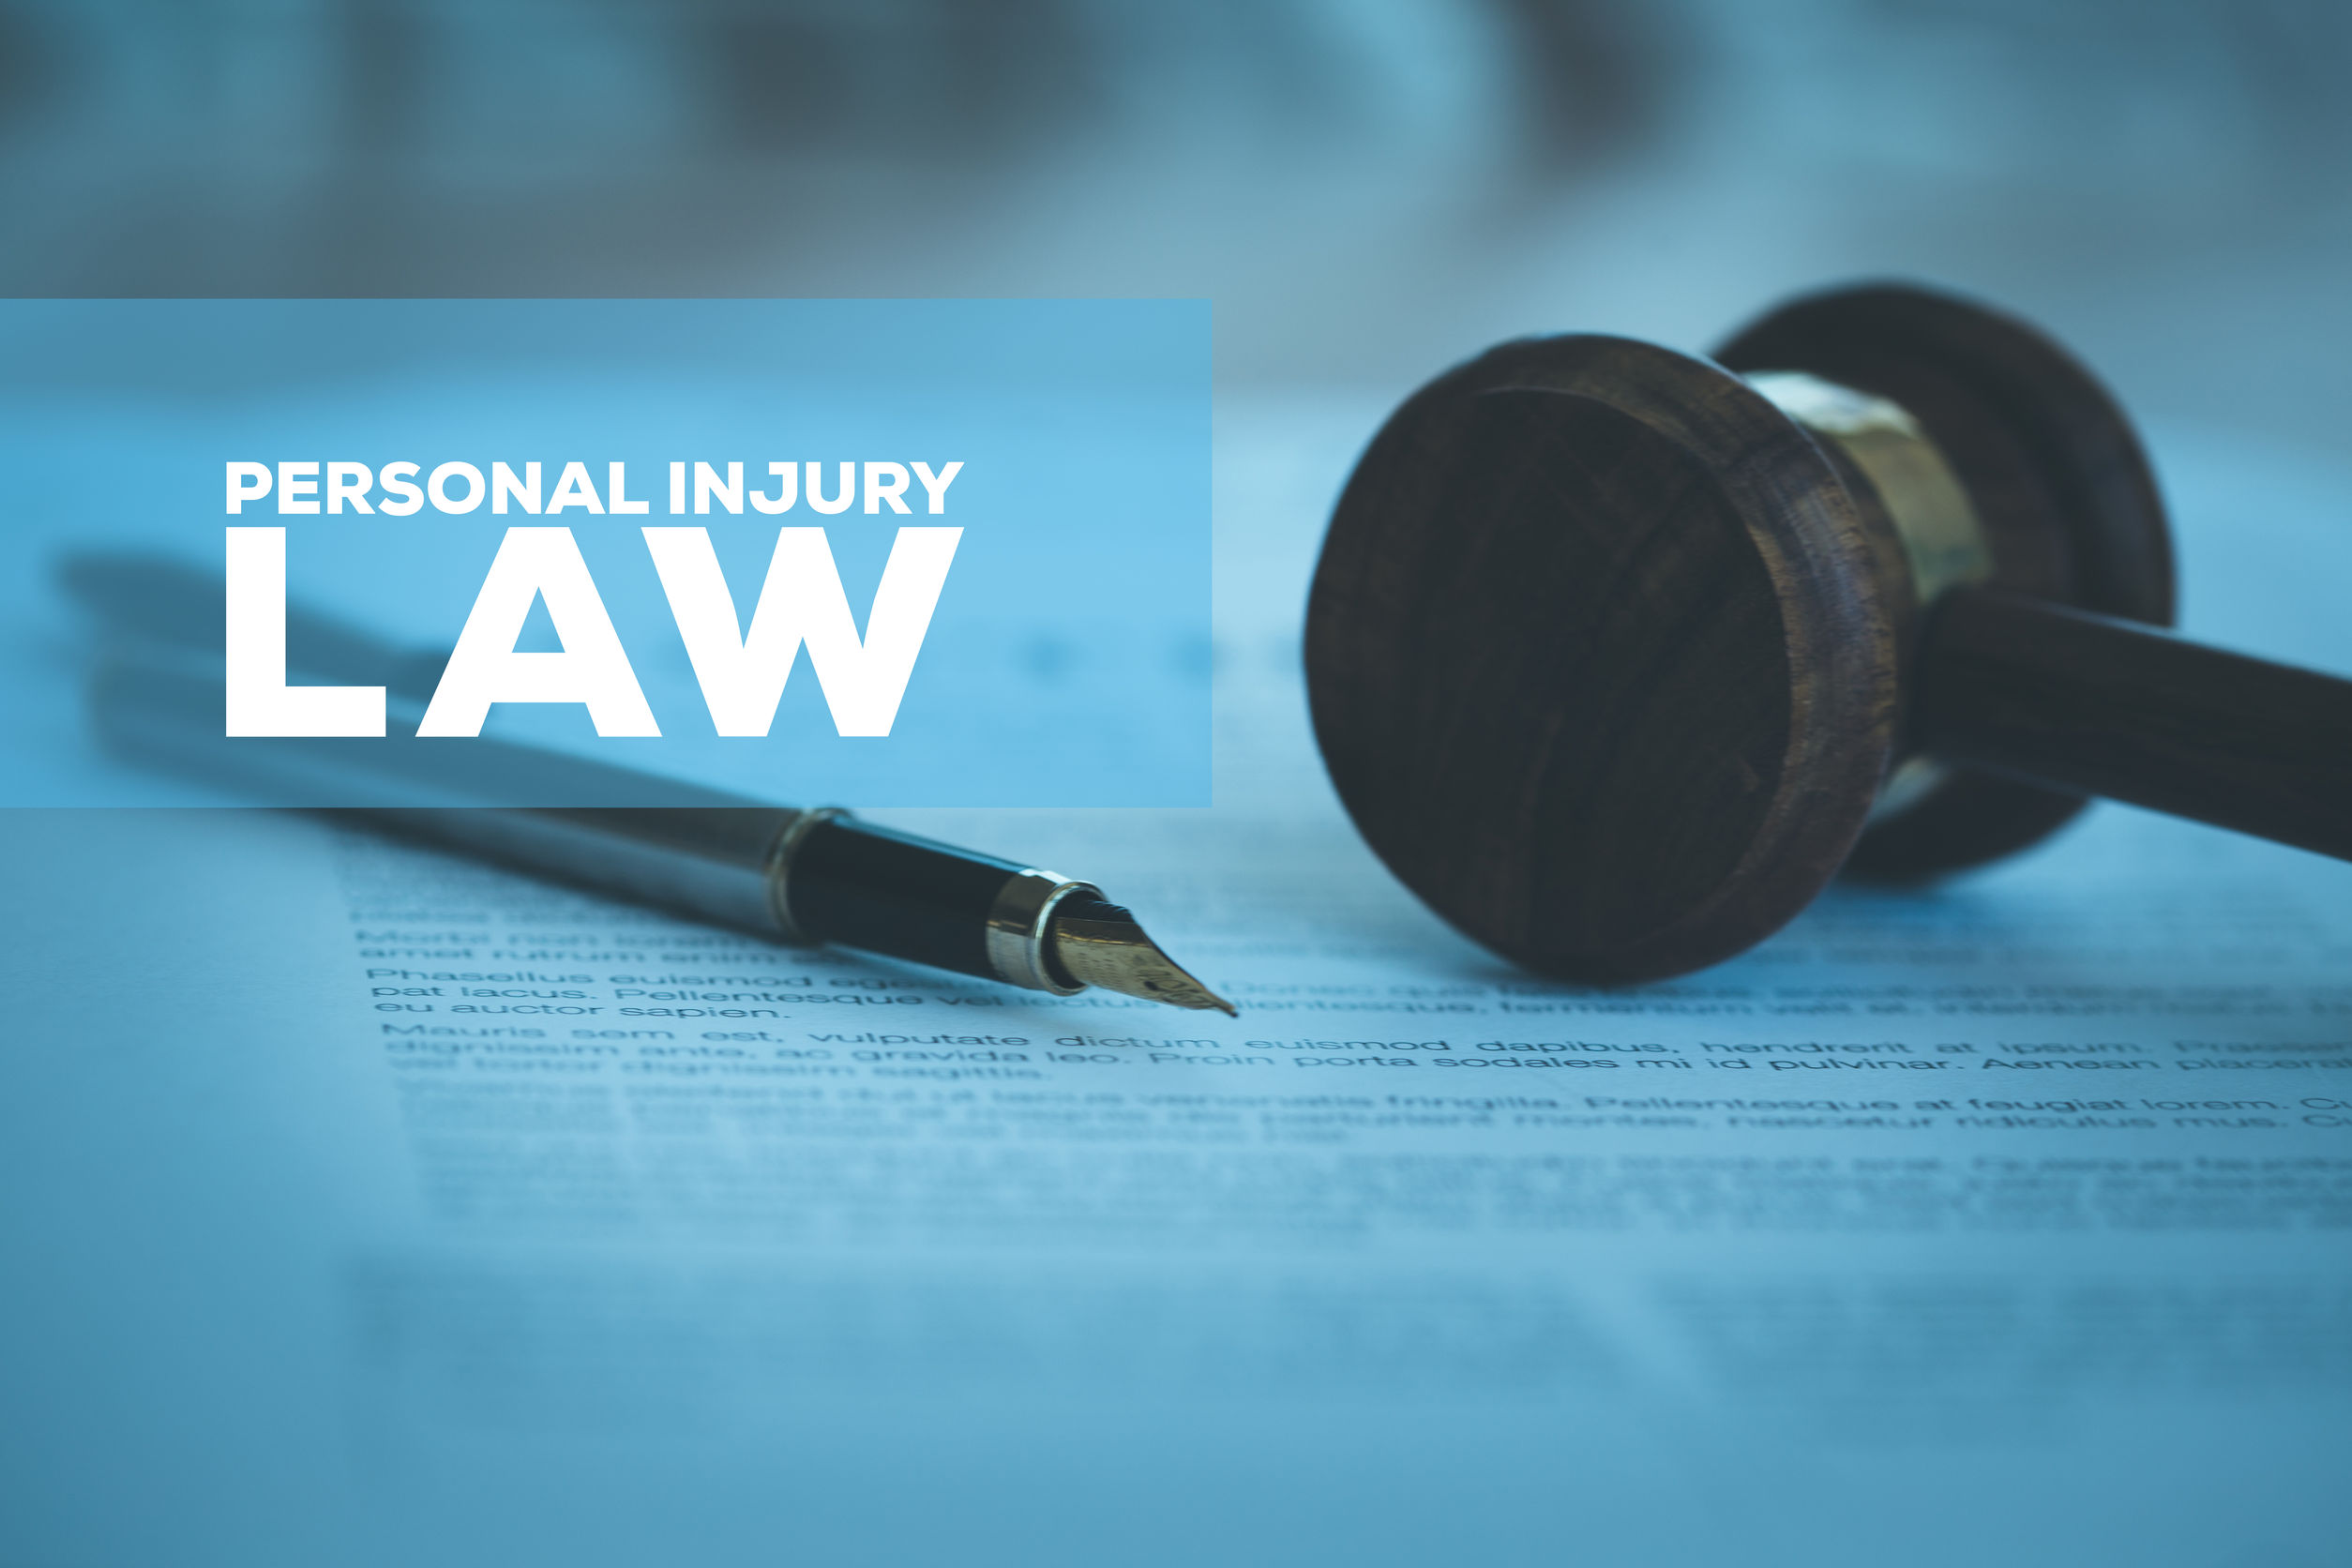 Personal Injury Lawyers in Kansas City, MO – Guidelines To Find The Best